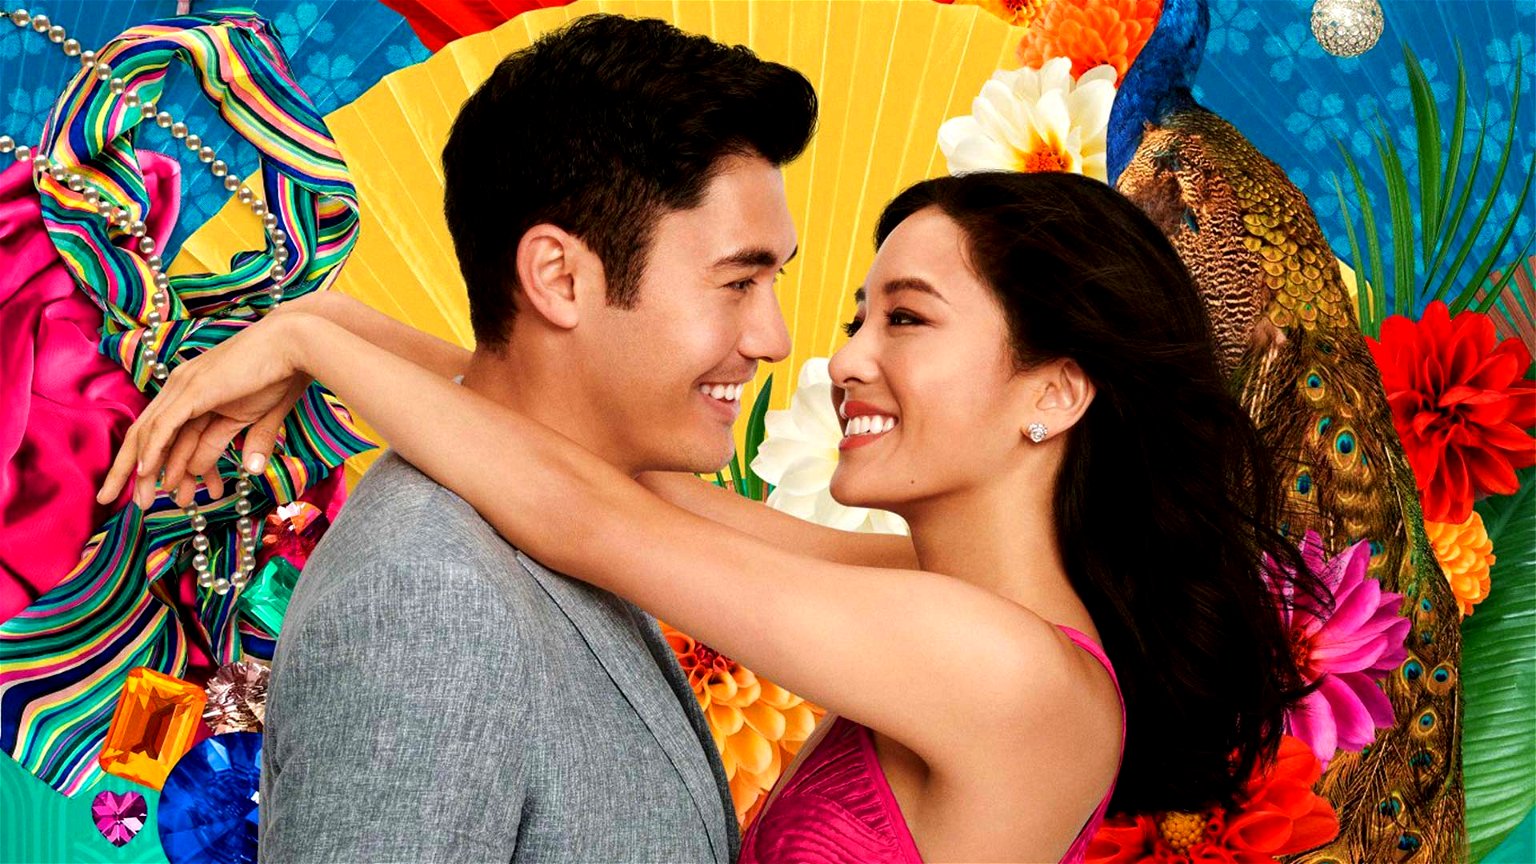 A ‘Crazy Rich Asians’ Sequel is Already in the Works